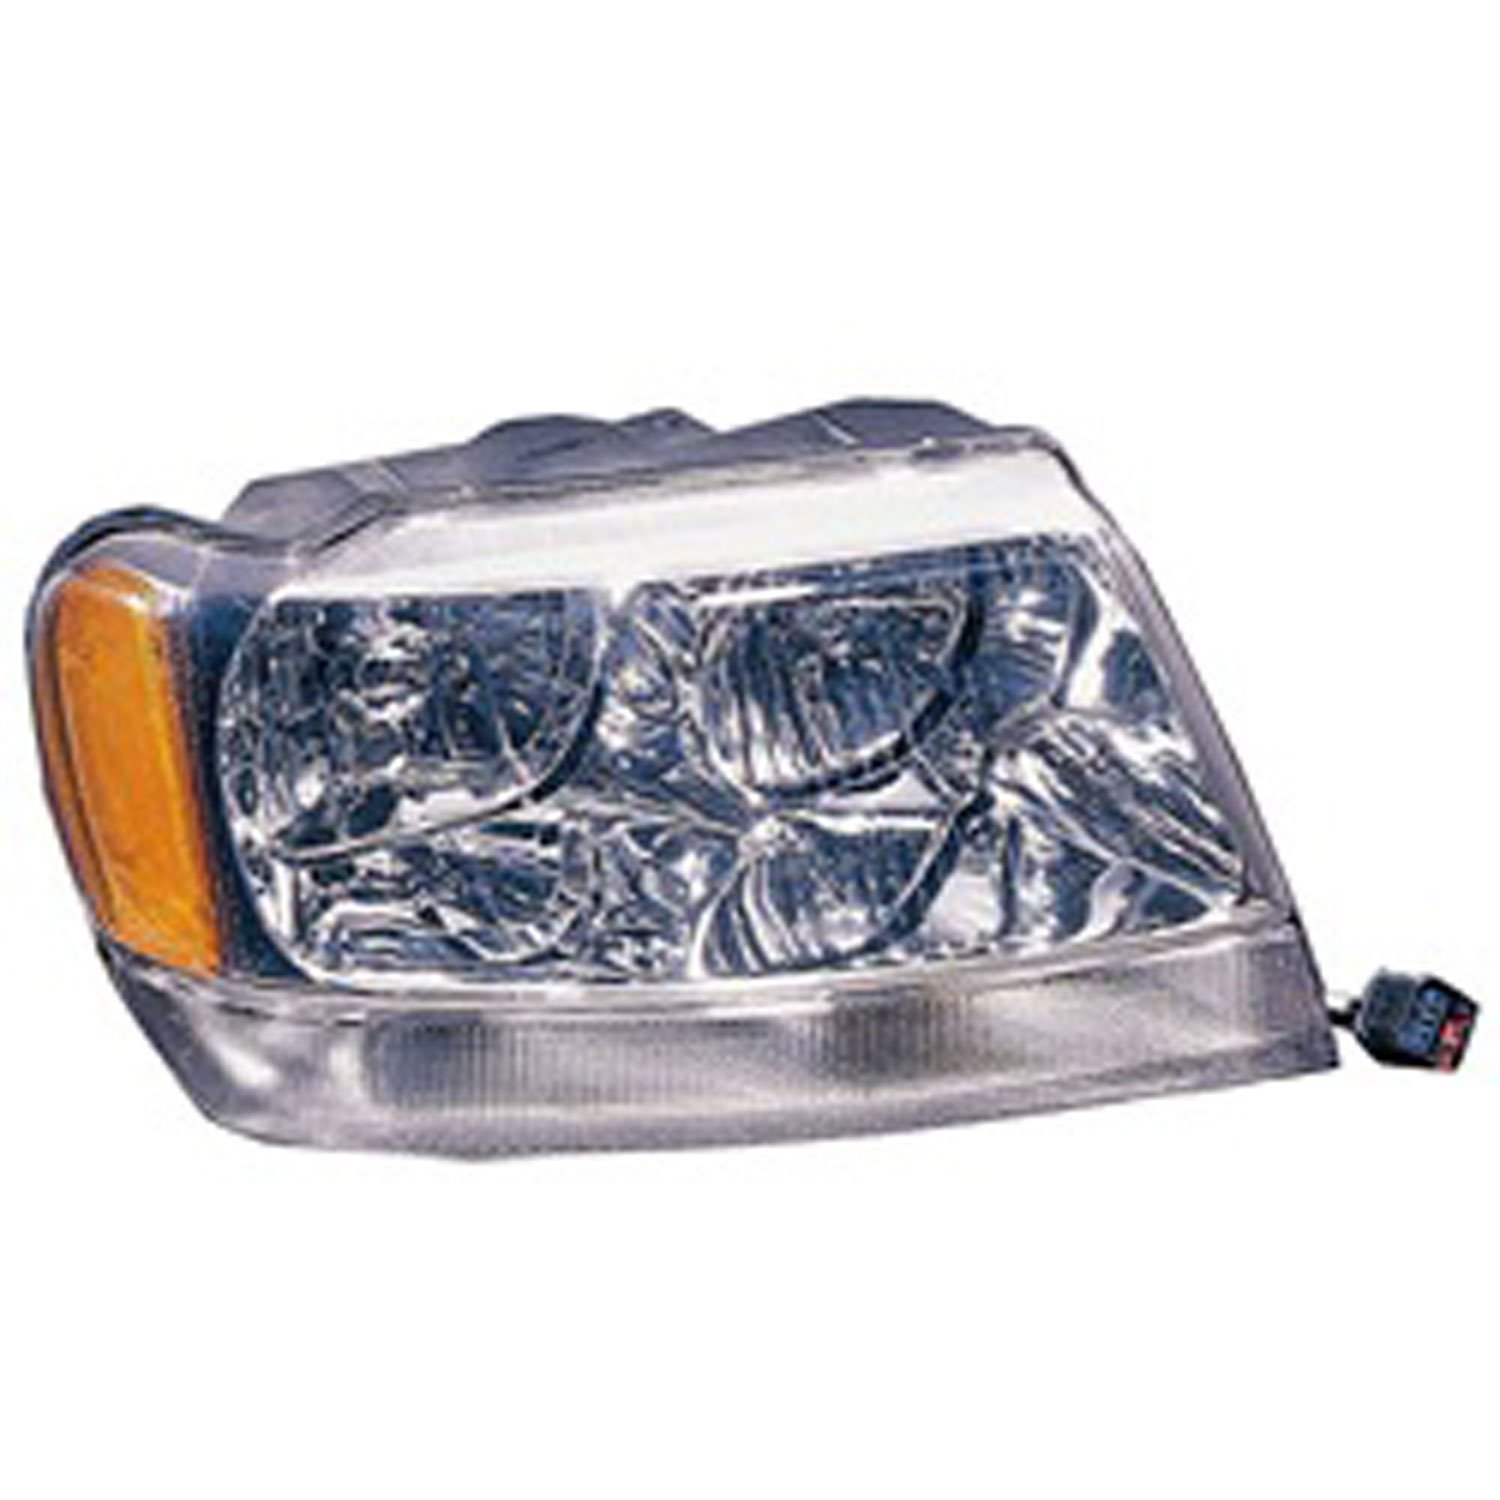 Replacement headlight assembly from Omix-ADA, Fits right side on 99-04 Jeep Grand Cherokee WJ Limiteds.